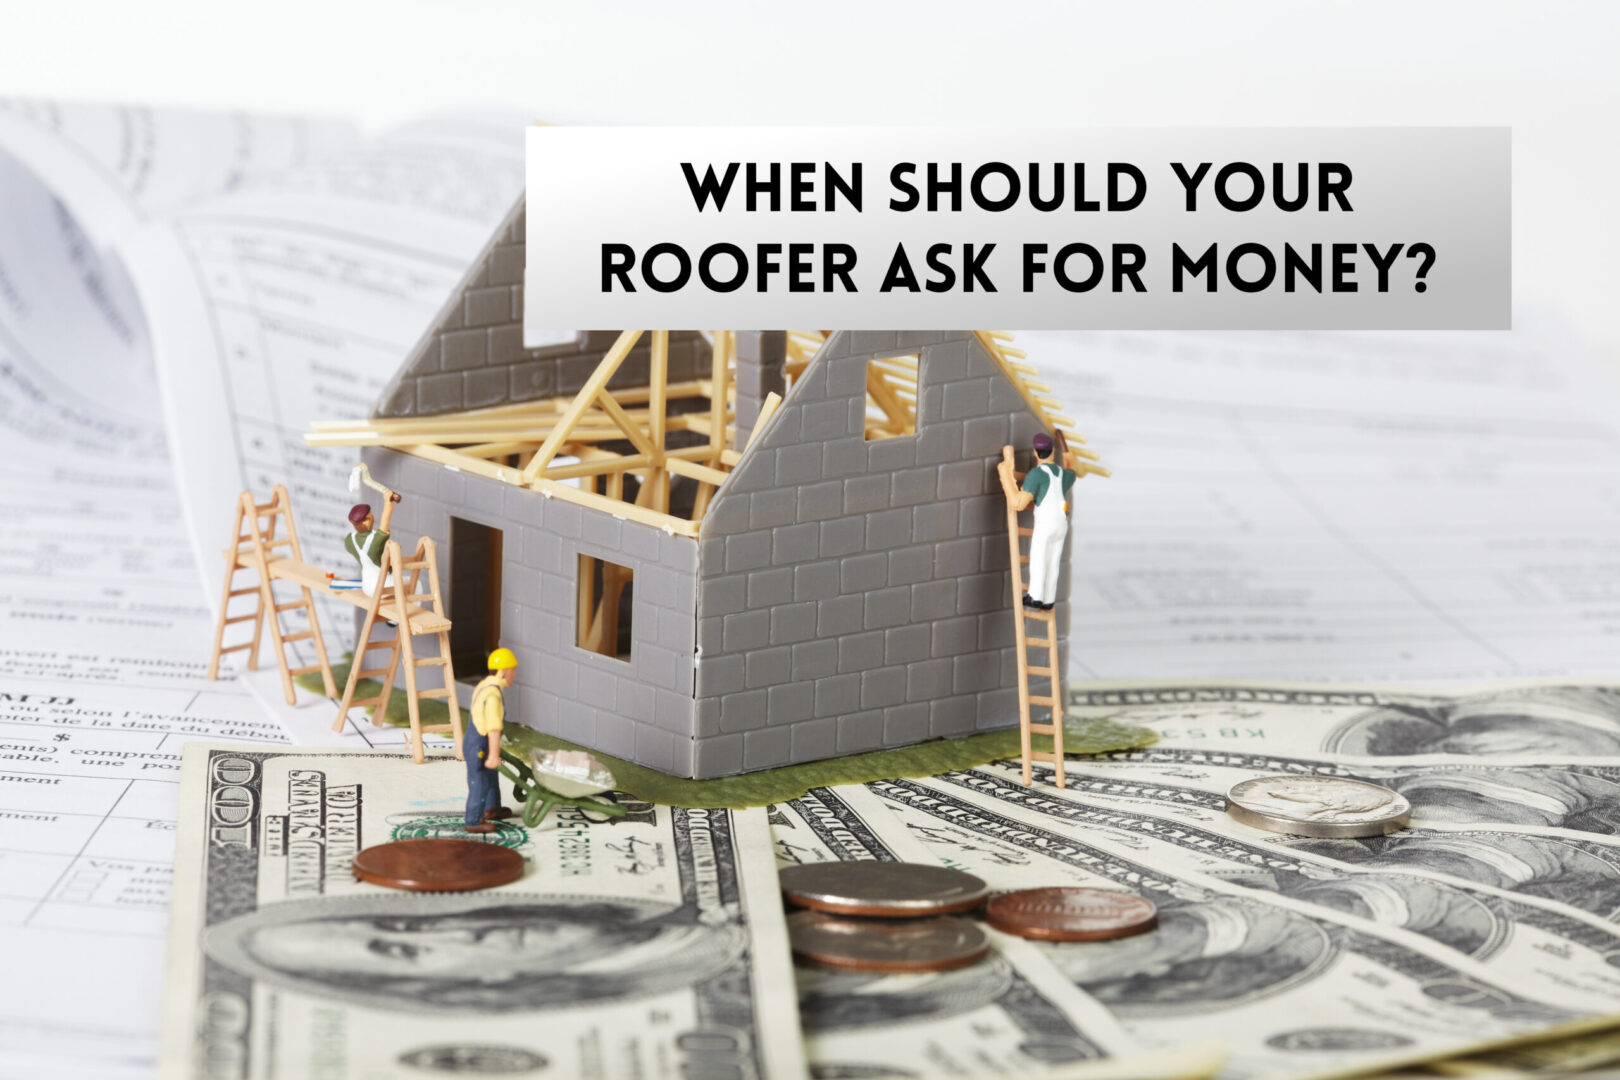 When Should Your Roofer Ask for Money